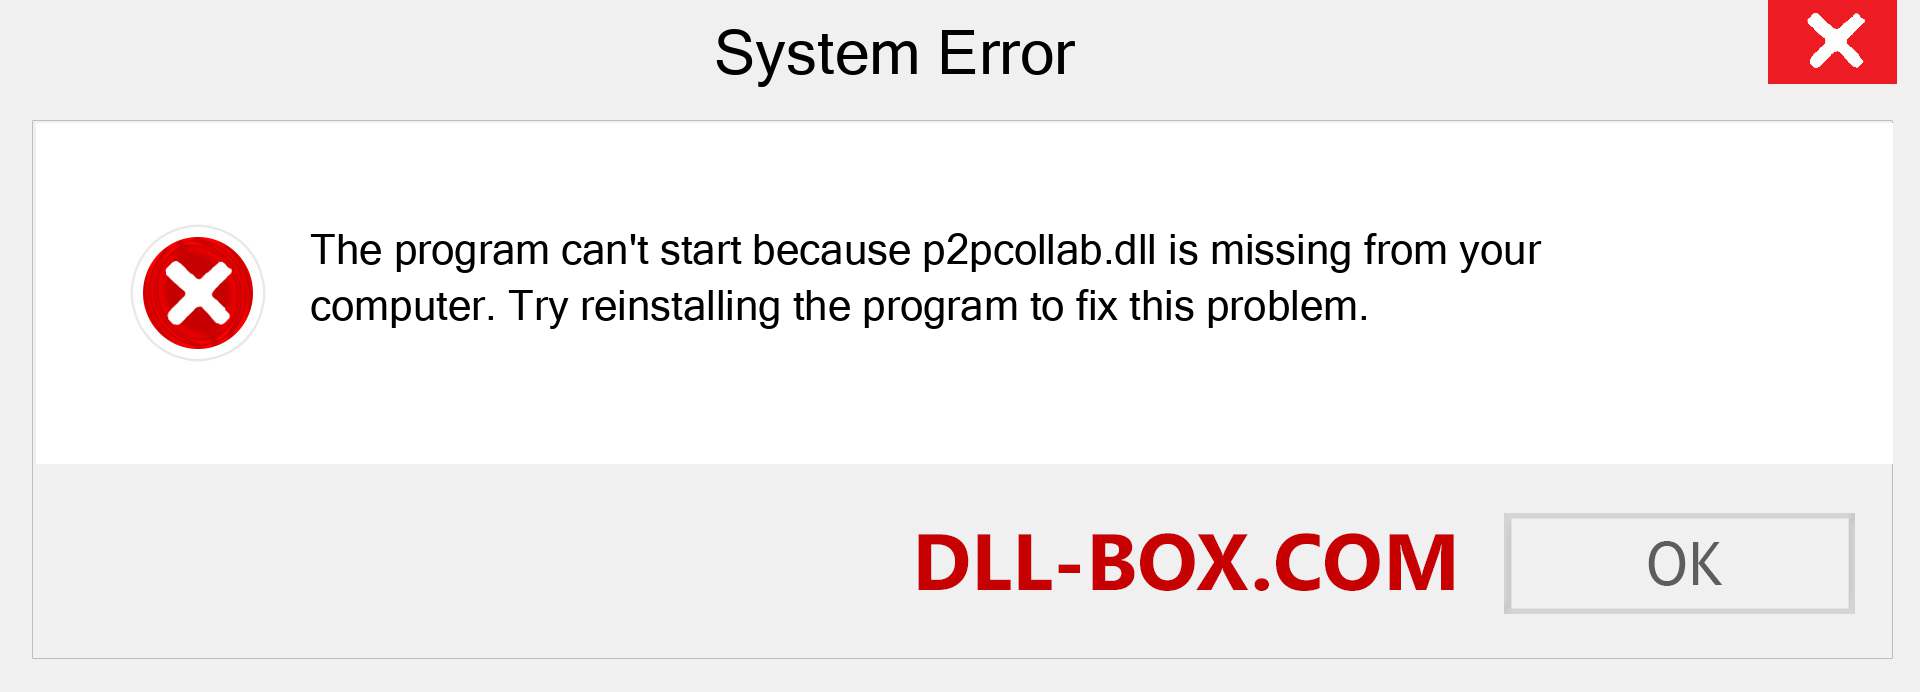  p2pcollab.dll file is missing?. Download for Windows 7, 8, 10 - Fix  p2pcollab dll Missing Error on Windows, photos, images